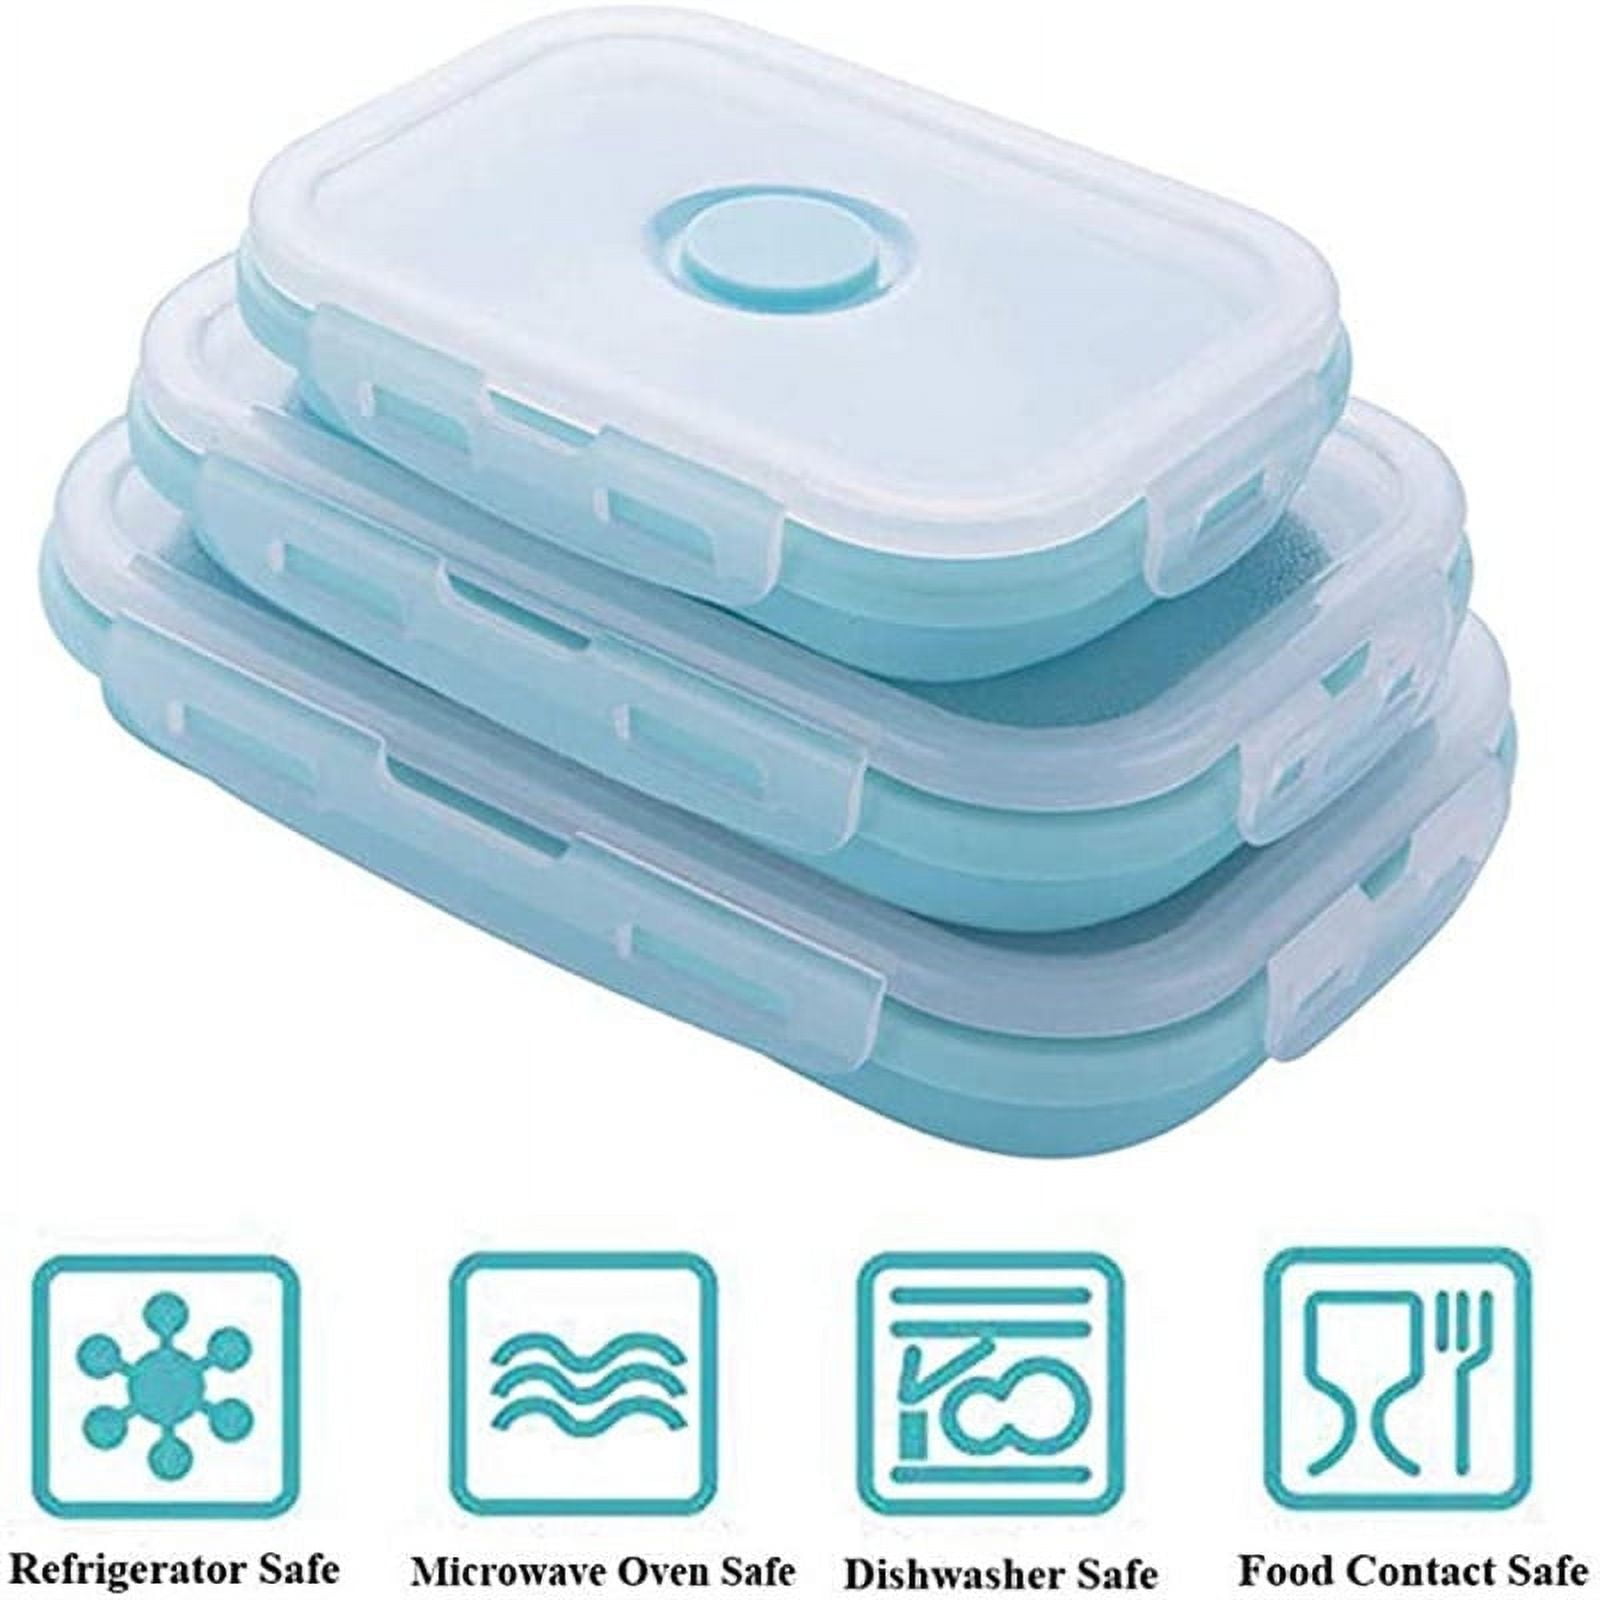 HALAFE 100% Silicone Food Storage Containers Set of 3, Silicone Bowls with  Lids Set, BPA Free, Food Safe Grade, Reusable, Microwave Dishwasher Freezer